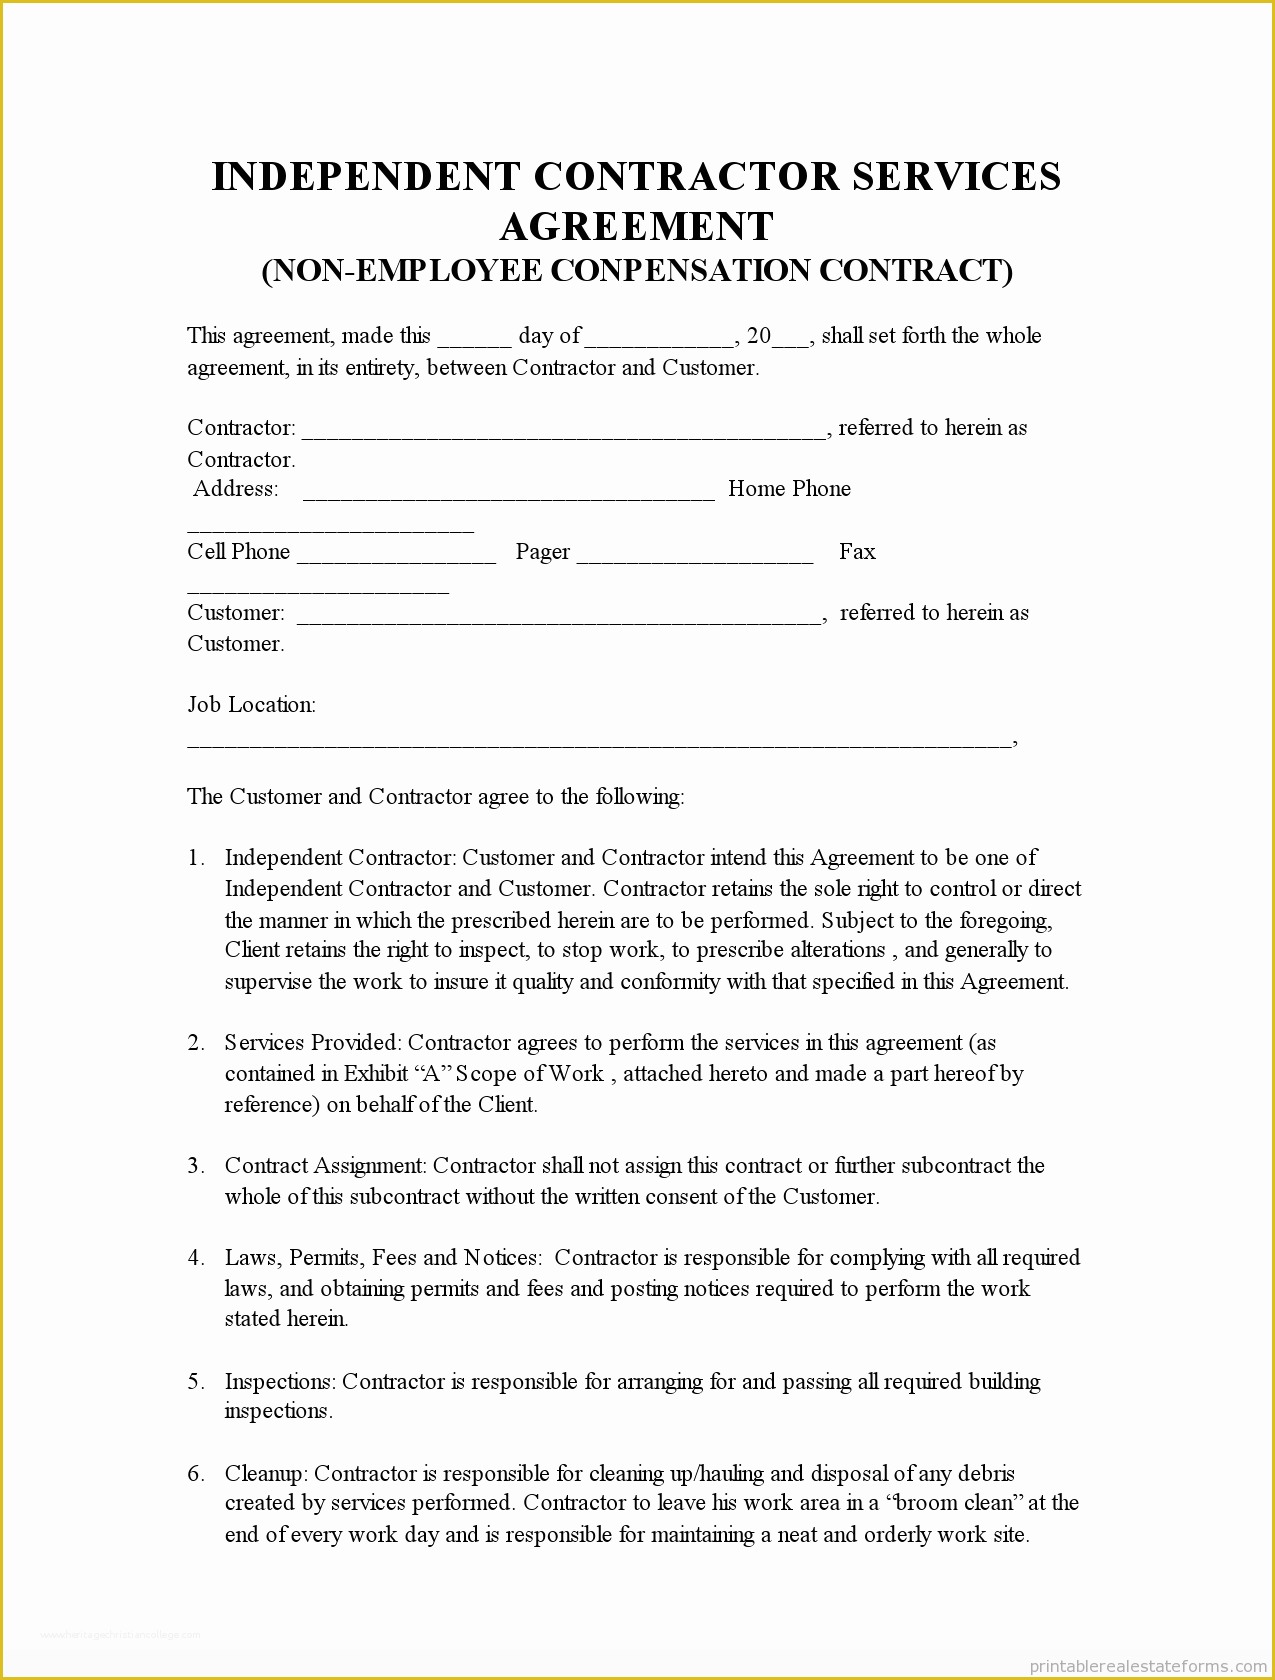 Free Contractor Contract Template Of Sample Printable Indep Contractor ...